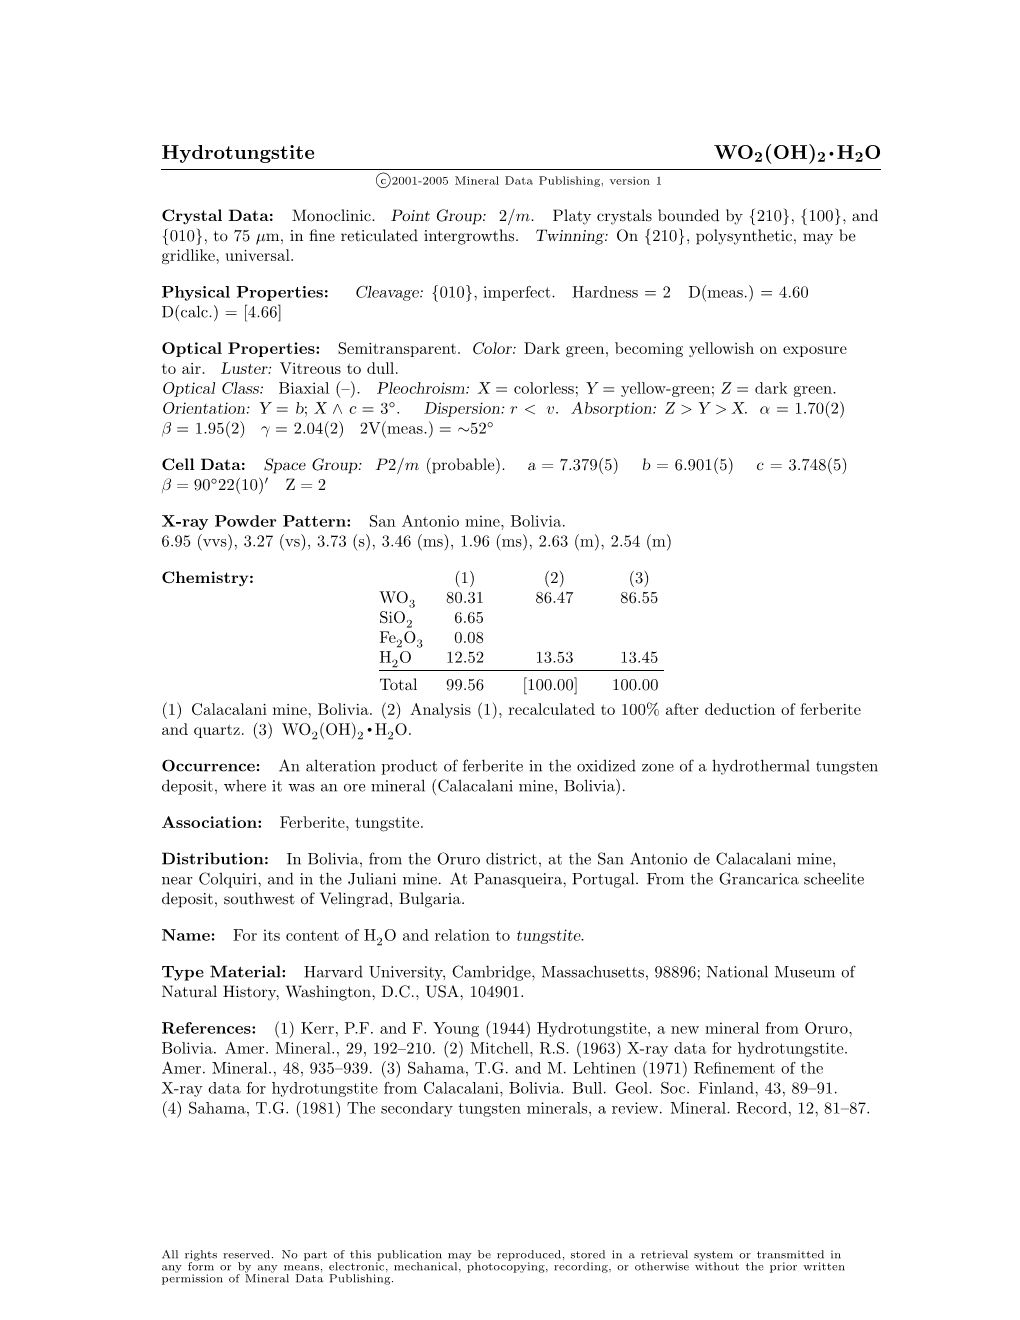 Hydrotungstite WO2(OH)2 • H2O C 2001-2005 Mineral Data Publishing, Version 1